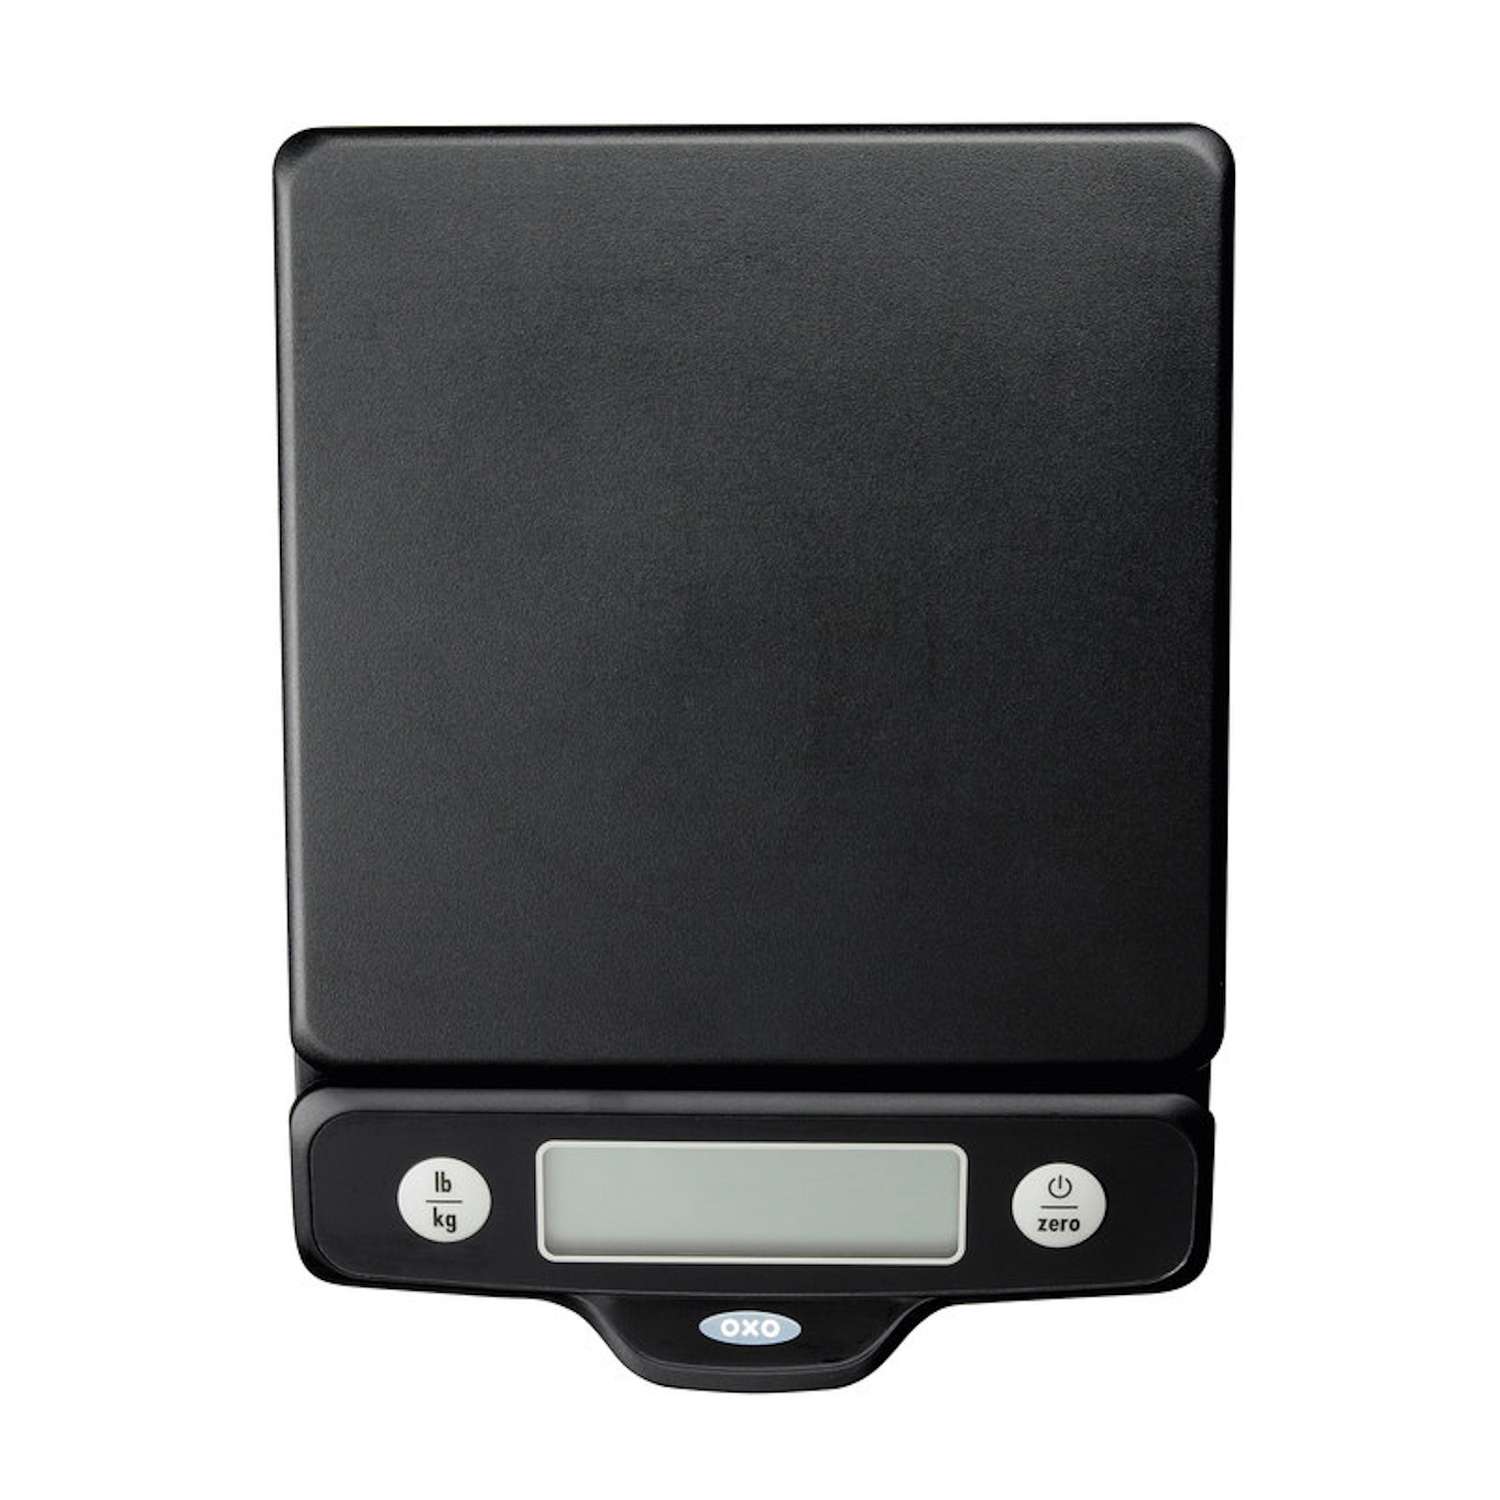 OXO GOOD GRIPS 5LB FOOD SCALE WITH PULL-OUT DISPLAY BRAND NEW FREE  SHIPPING!!